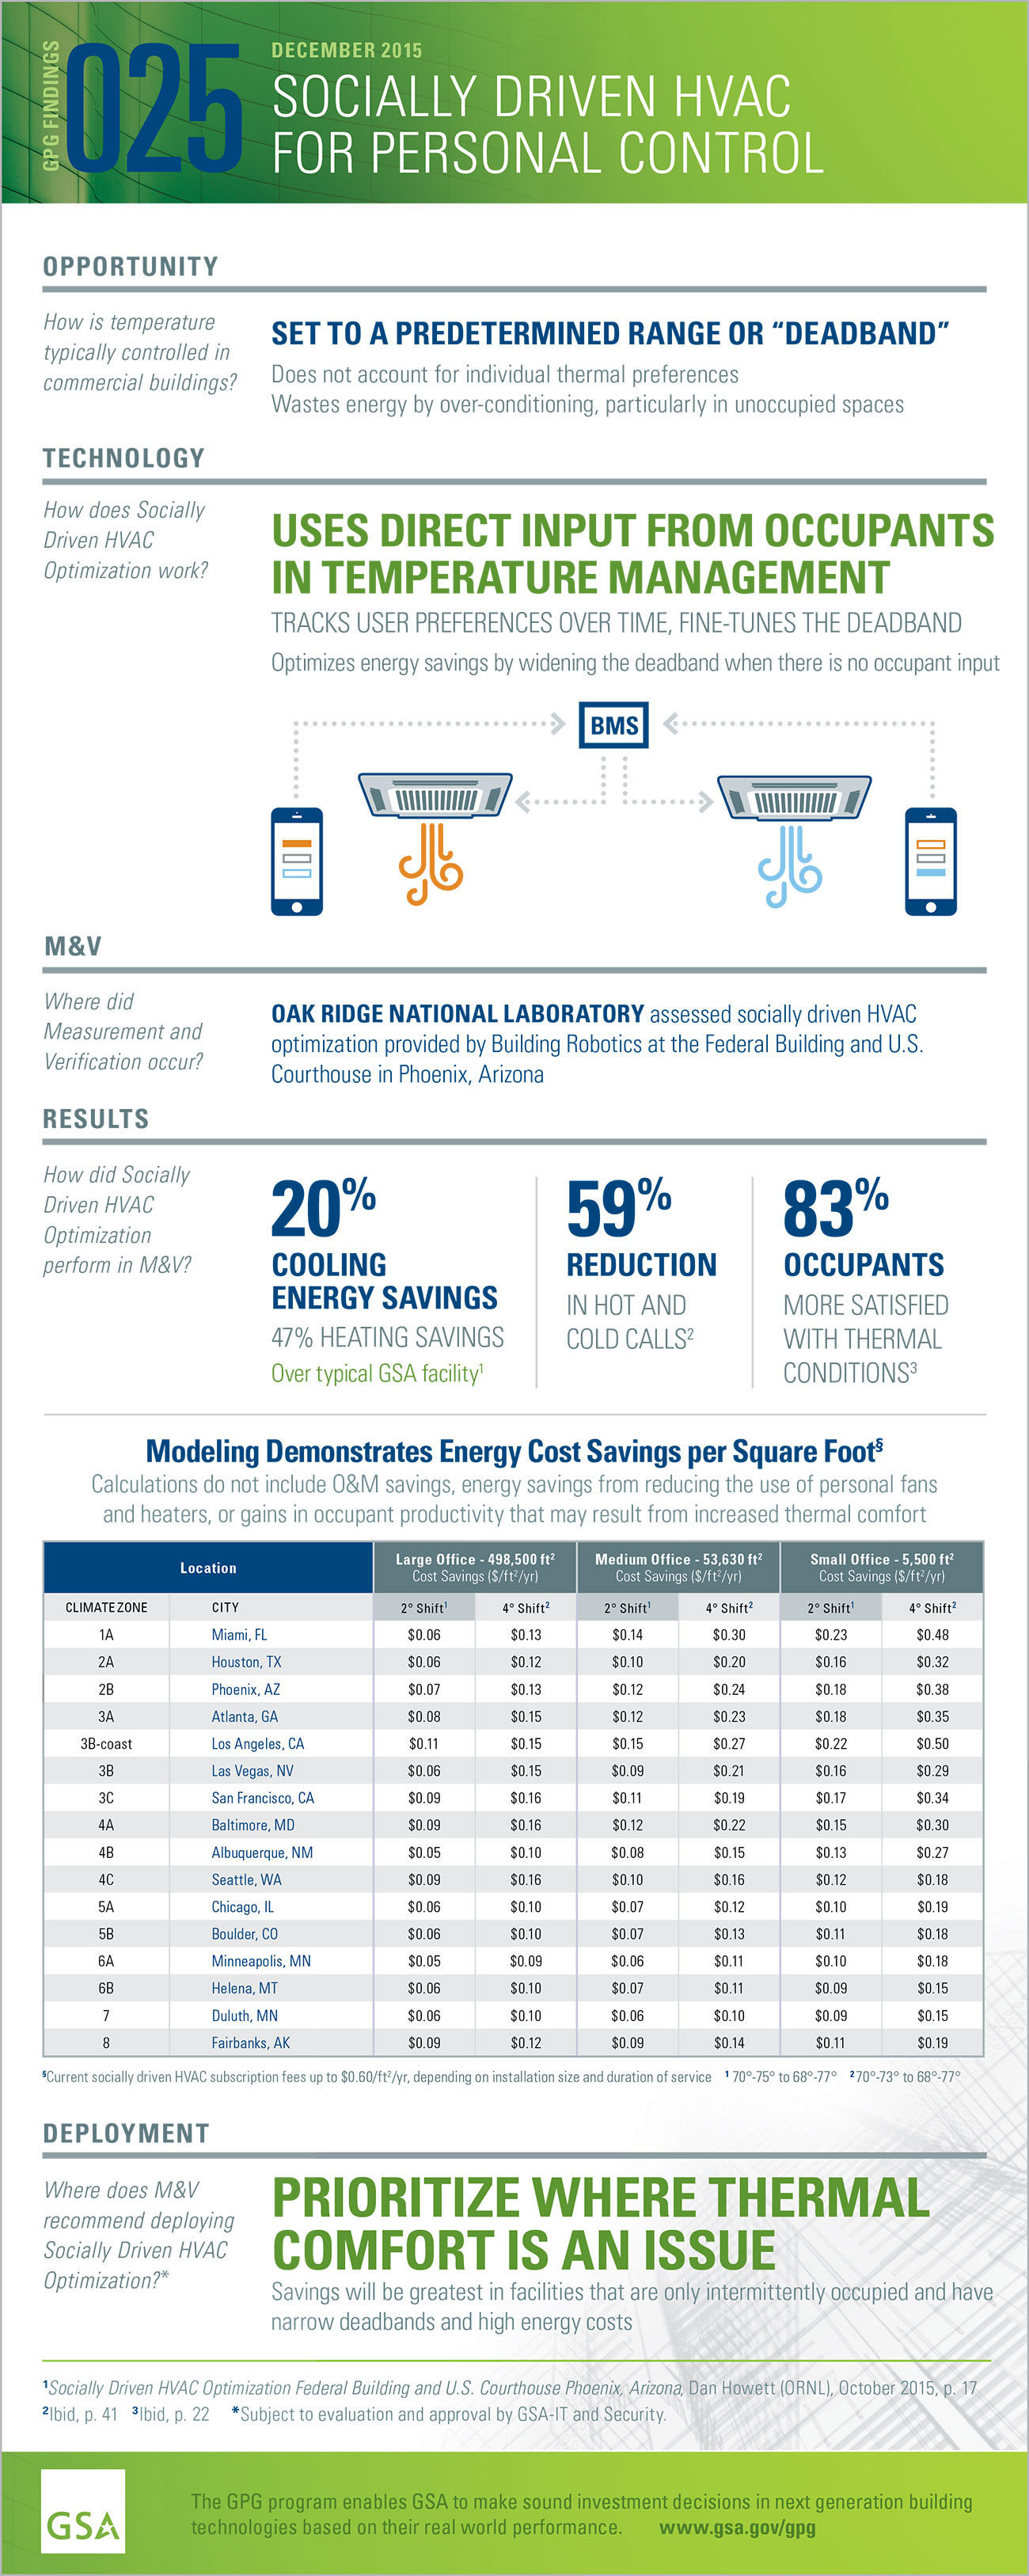 Infographic: GPG findings 025: December 2015, Socially-driven HVAC for personal control